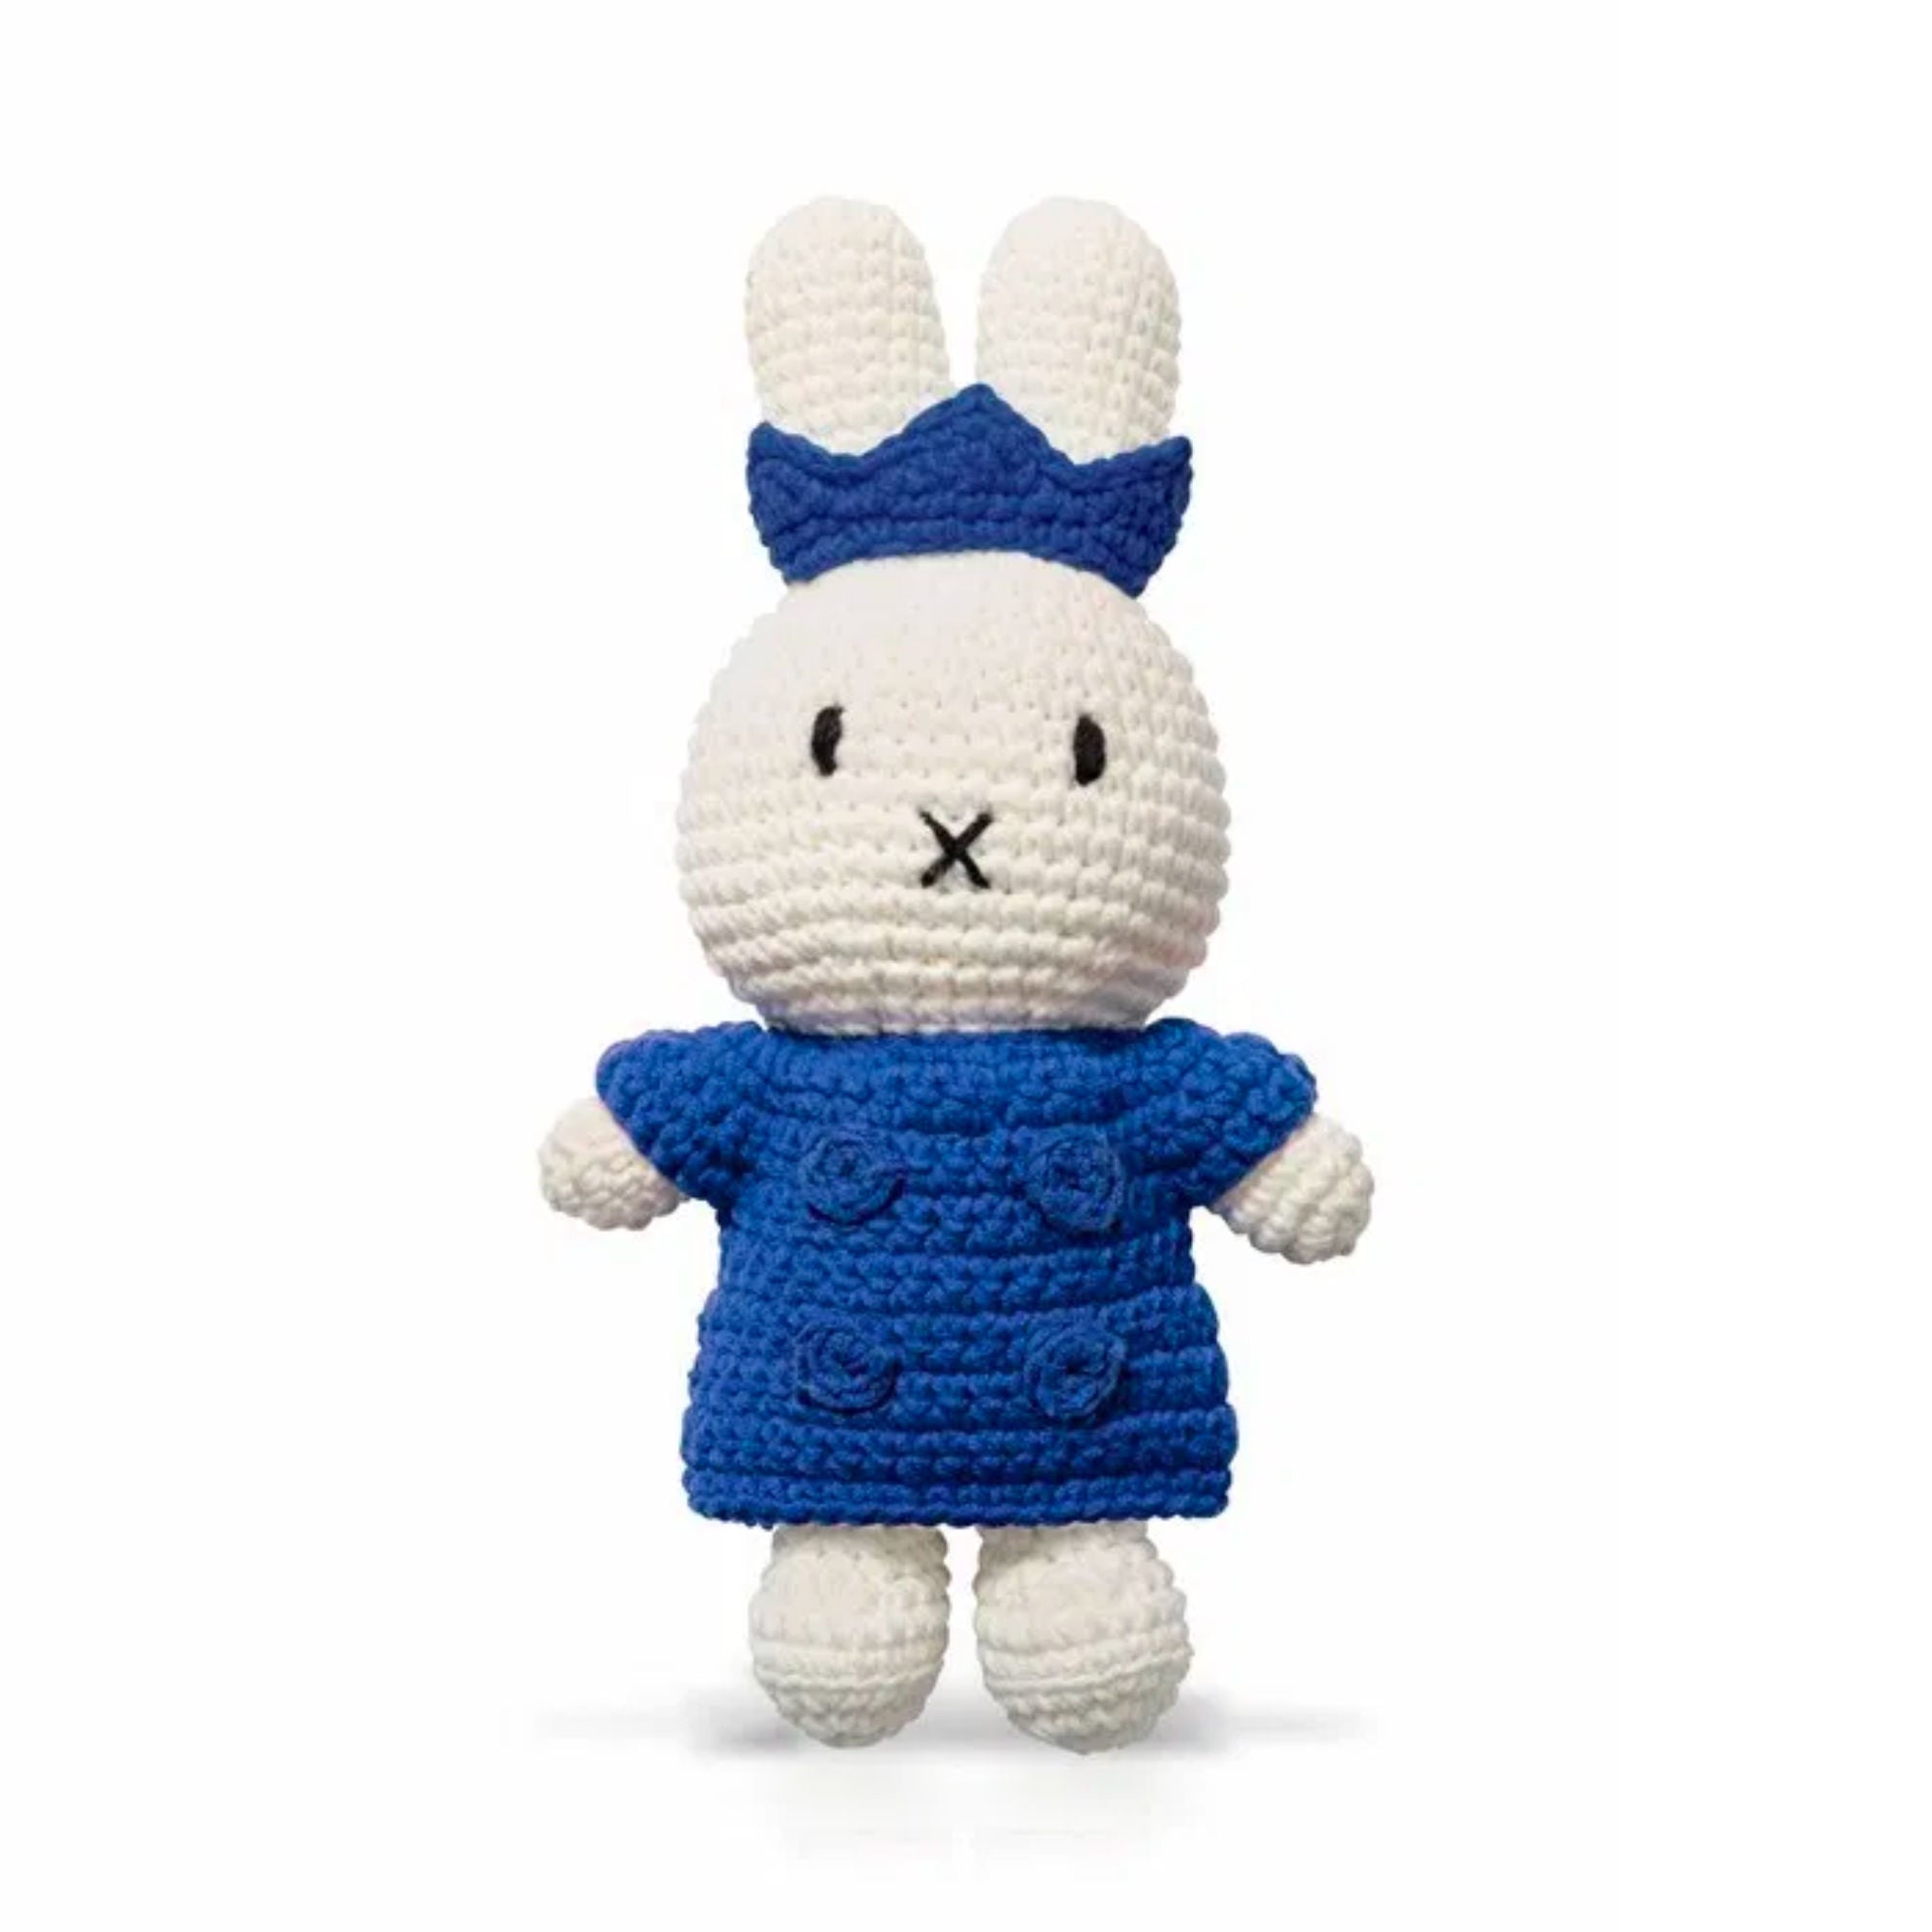 Just Dutch handmade doll, Miffy and her blue kingset